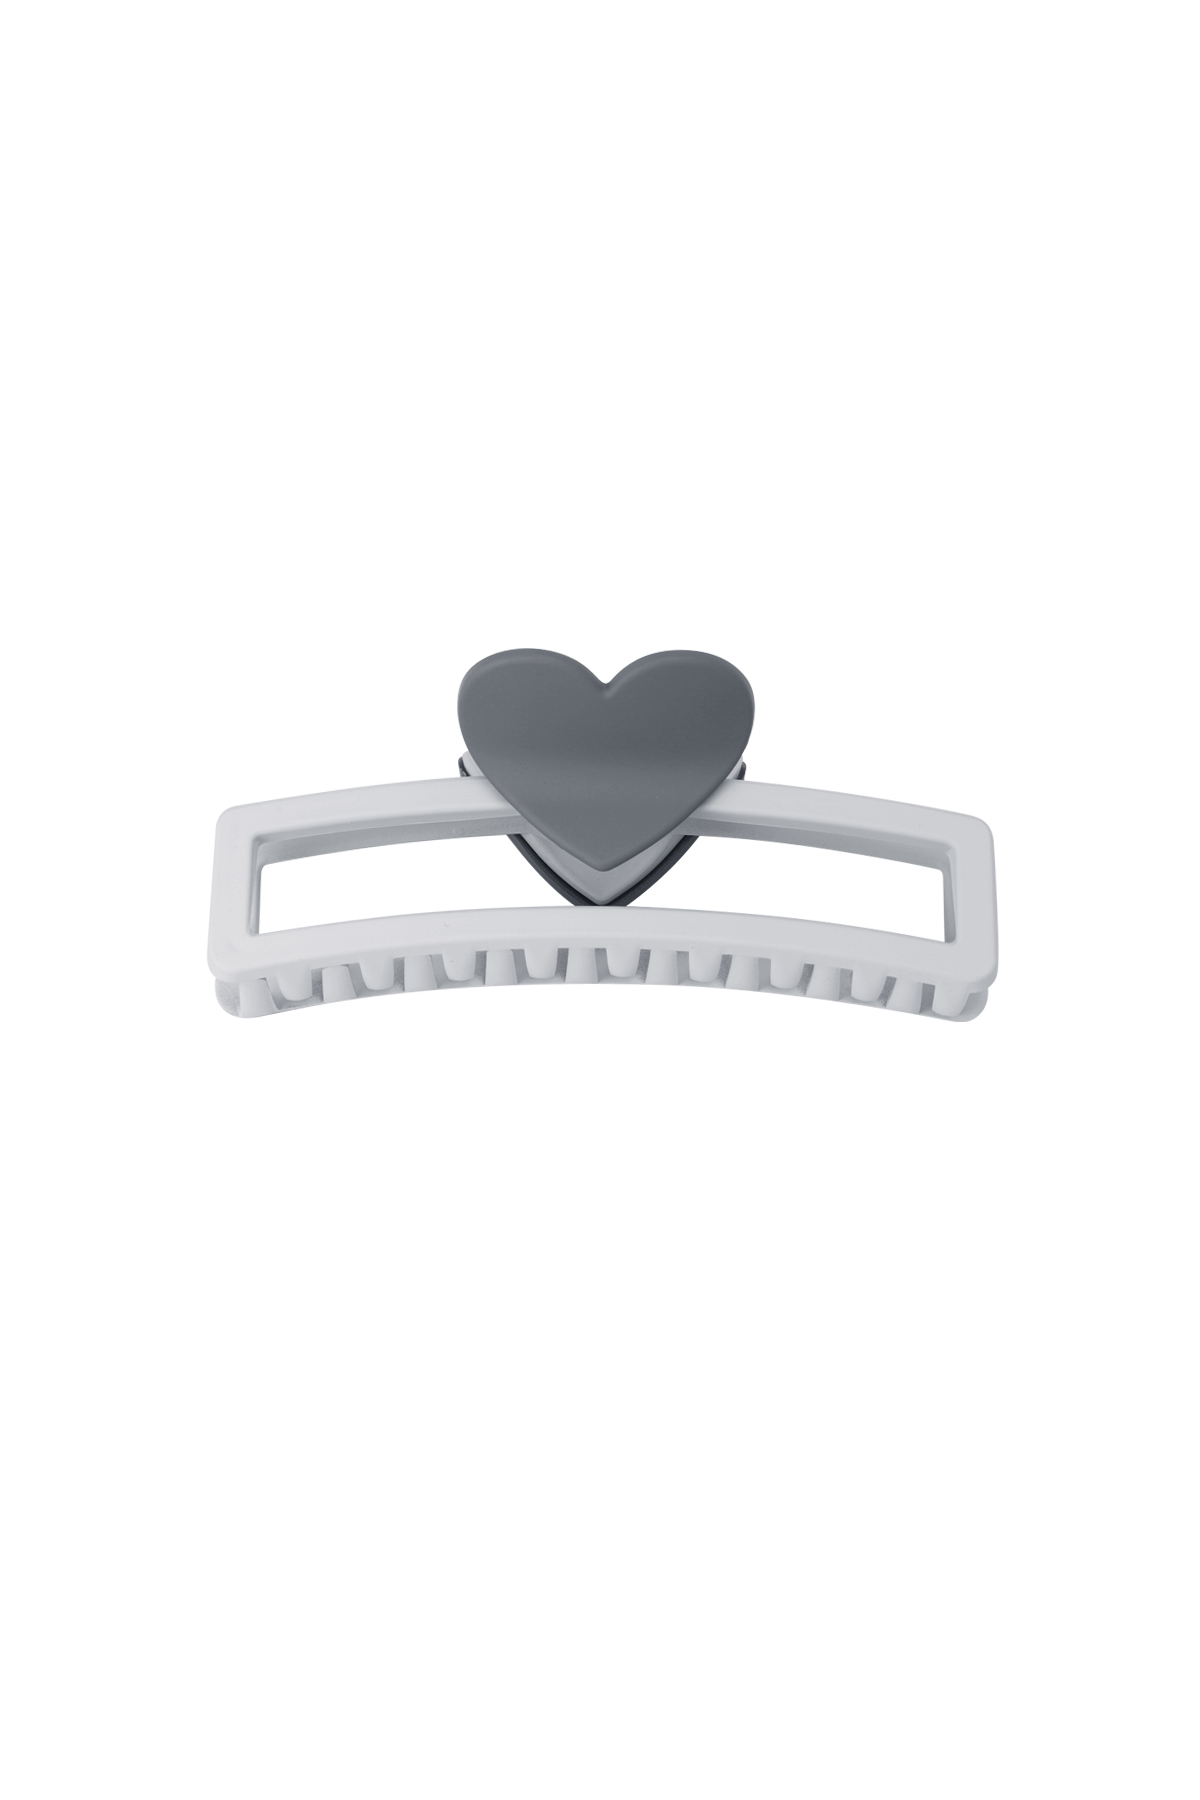 hair clip with heart-shaped handle - gray h5 